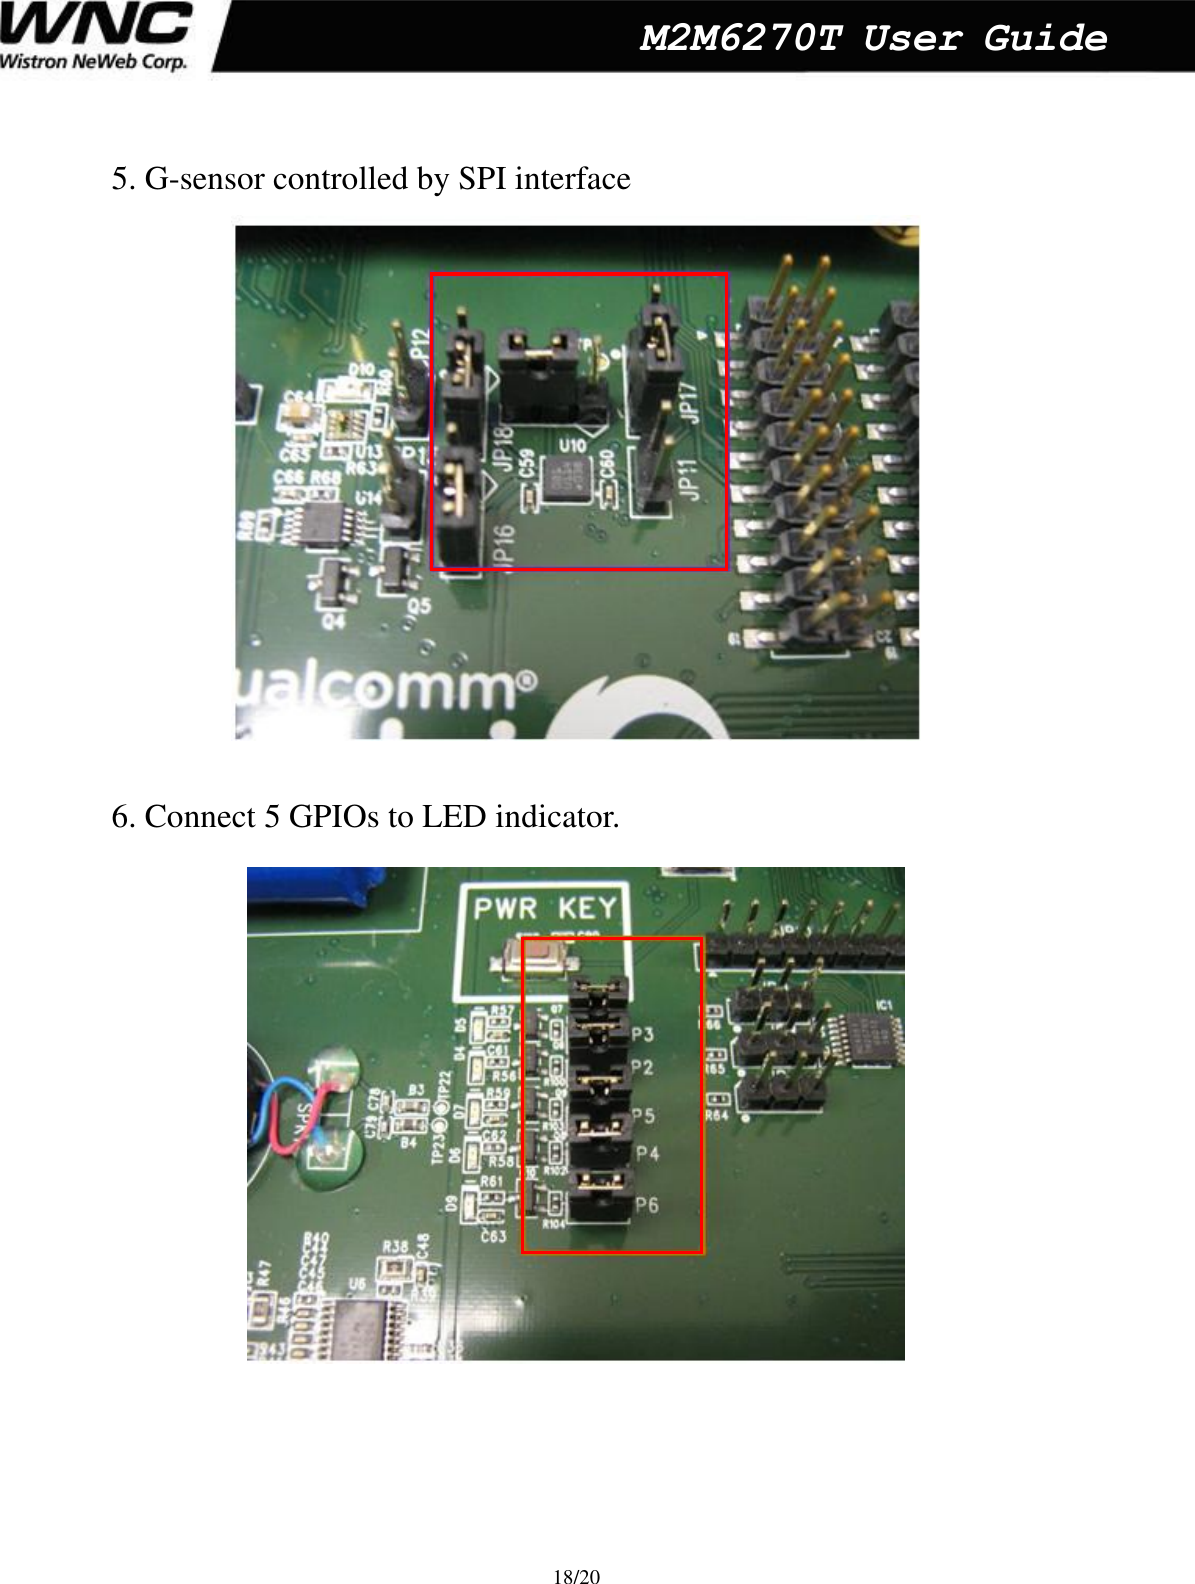  18/20  M2M6270T User Guide 5. G-sensor controlled by SPI interface       6. Connect 5 GPIOs to LED indicator.      